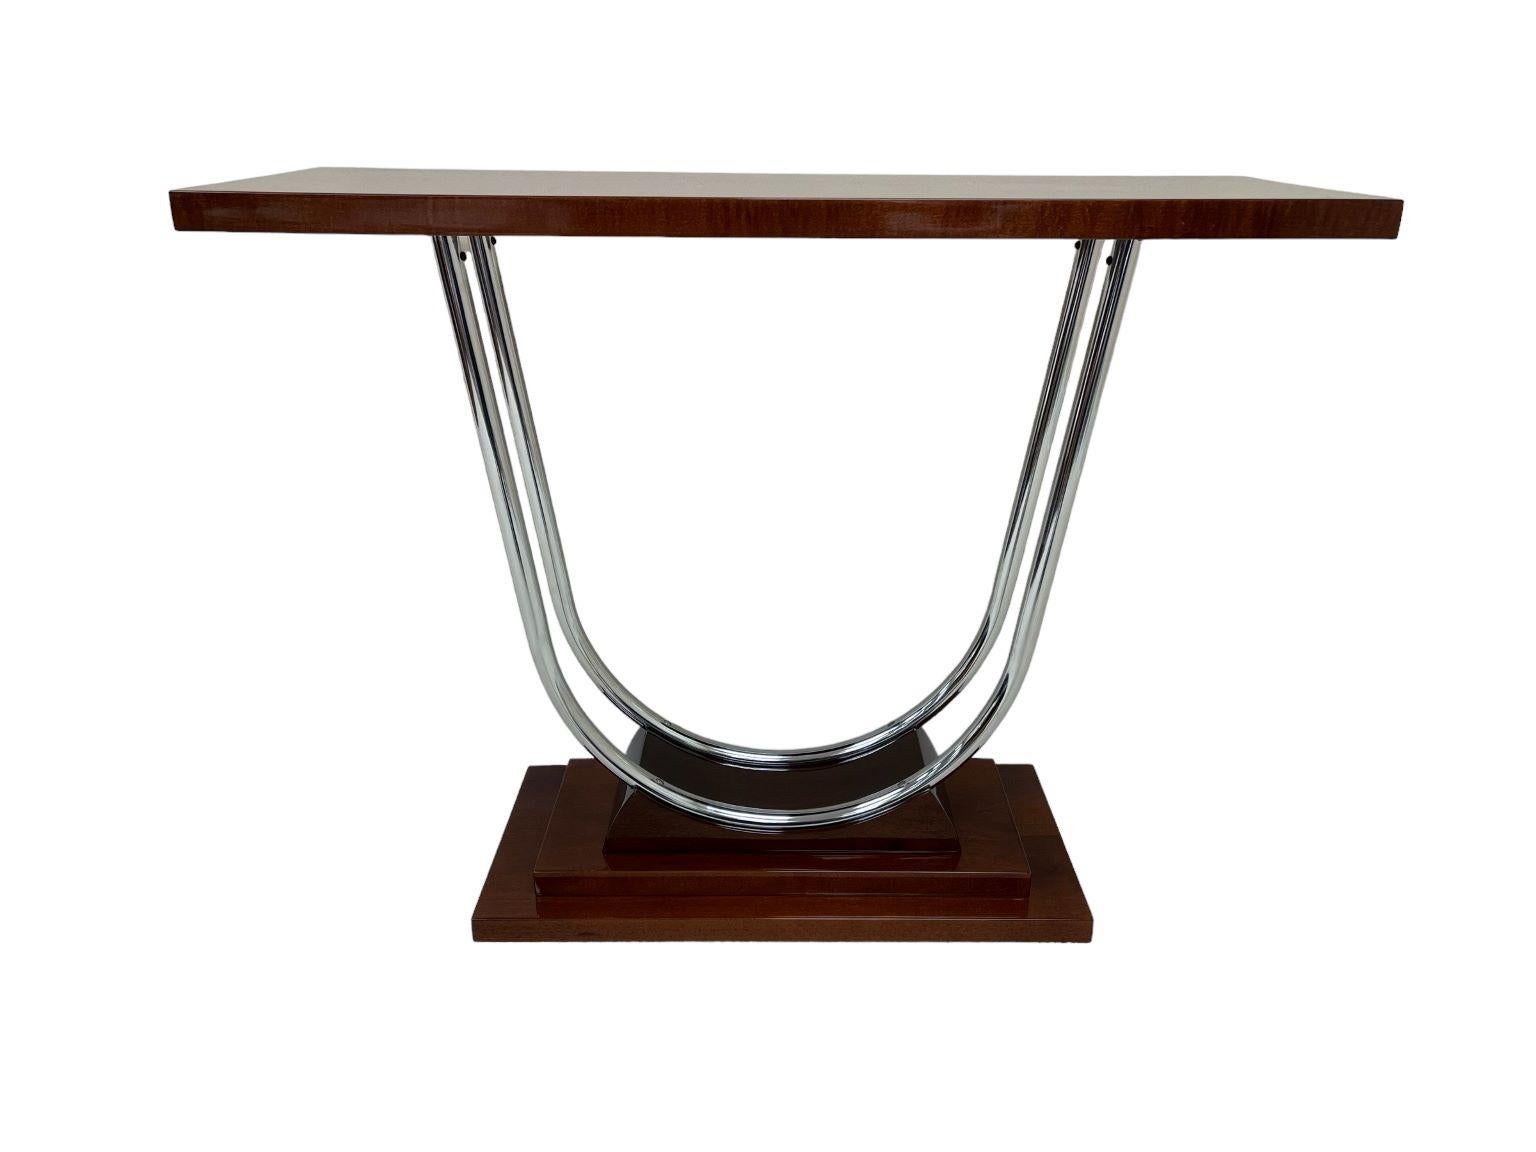 An exquisite Art Deco streamline chrome console table. Beautifully crafted and restored solid maple-stained mahogany. A simple streamline design, stout top supported by two polished chrome supports all sitting on a skyscraper base. An excellent